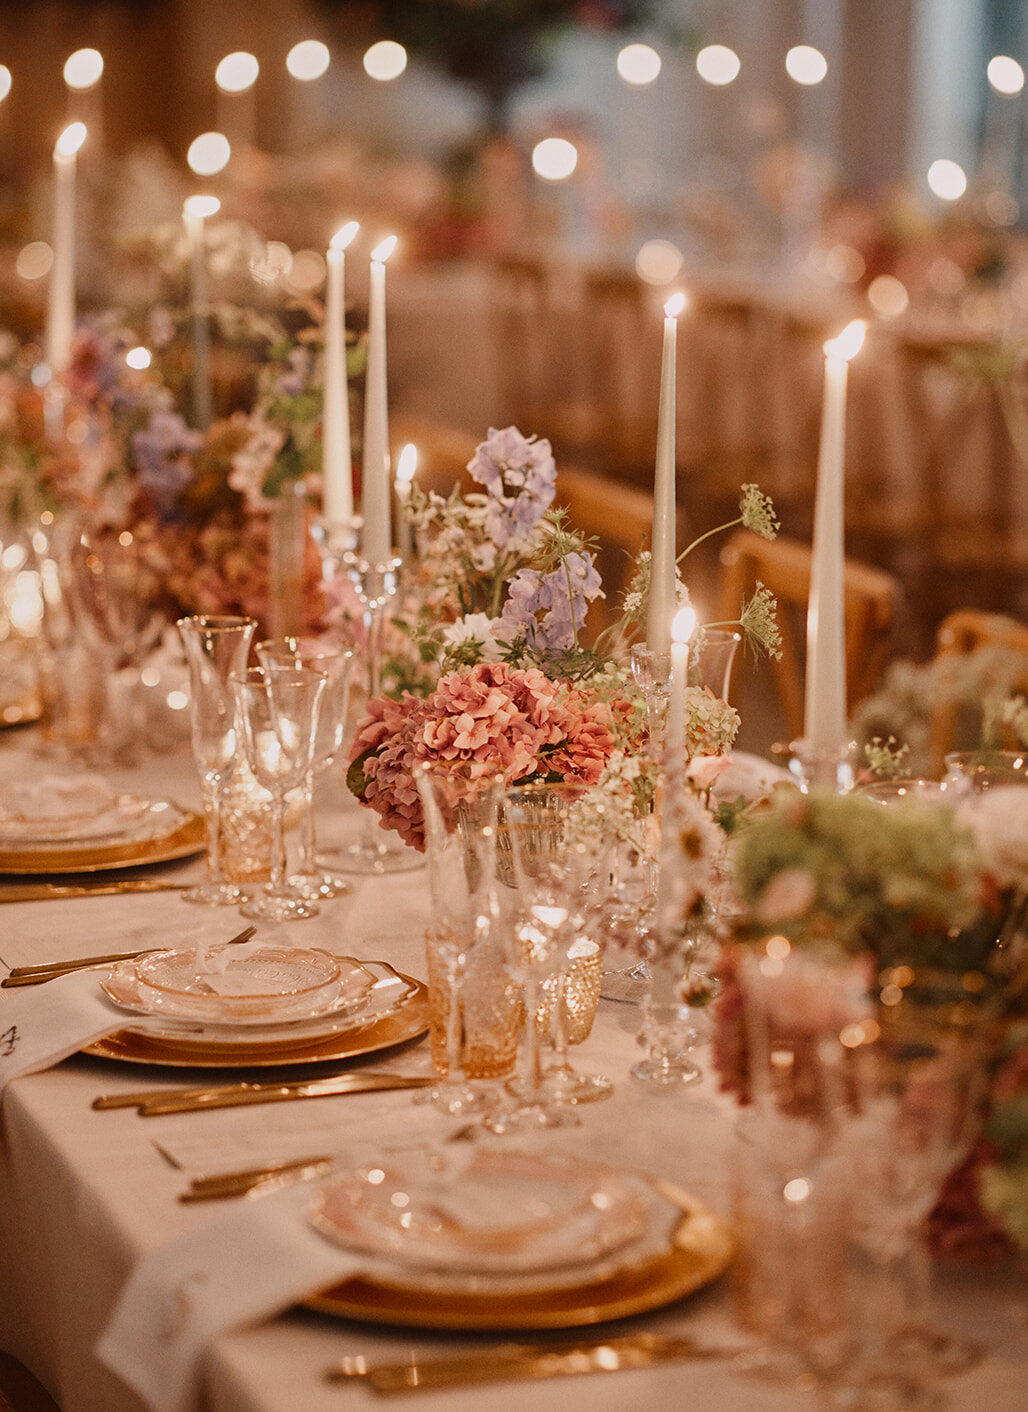 Wedding planner Ella Hartig shows a wedding dinner at Wilderness reserve with lots of flowers and candles